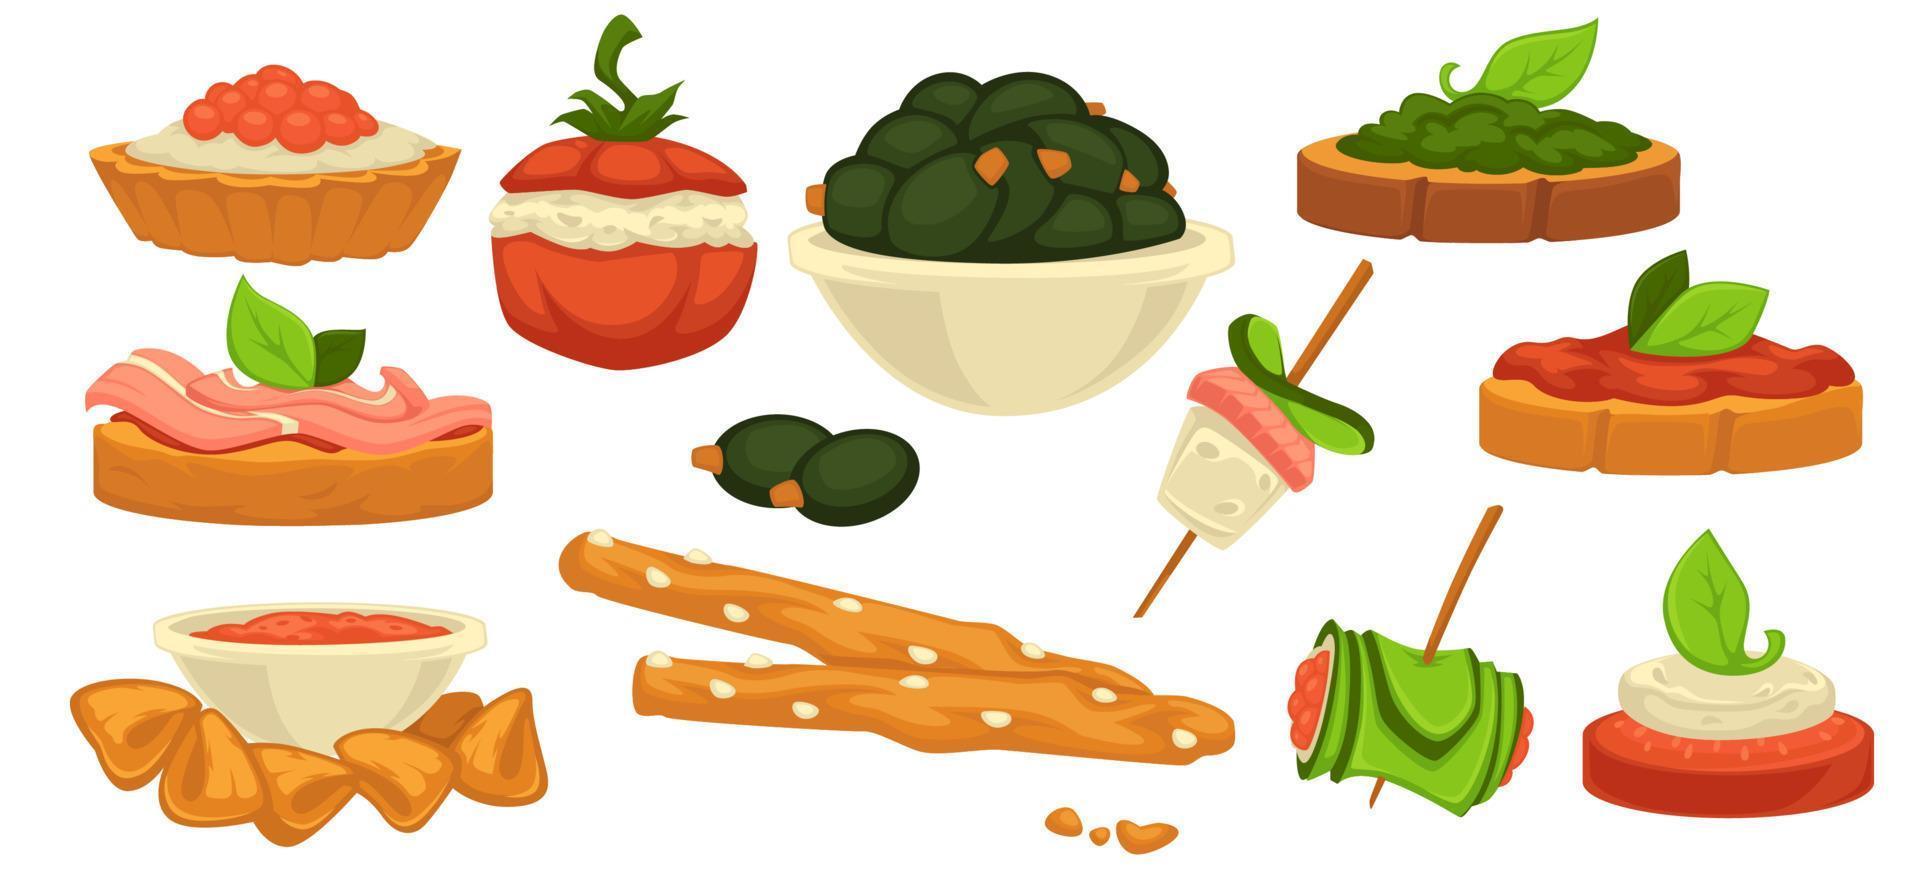 Snacks and appetizers, seaweed and bread canape vector